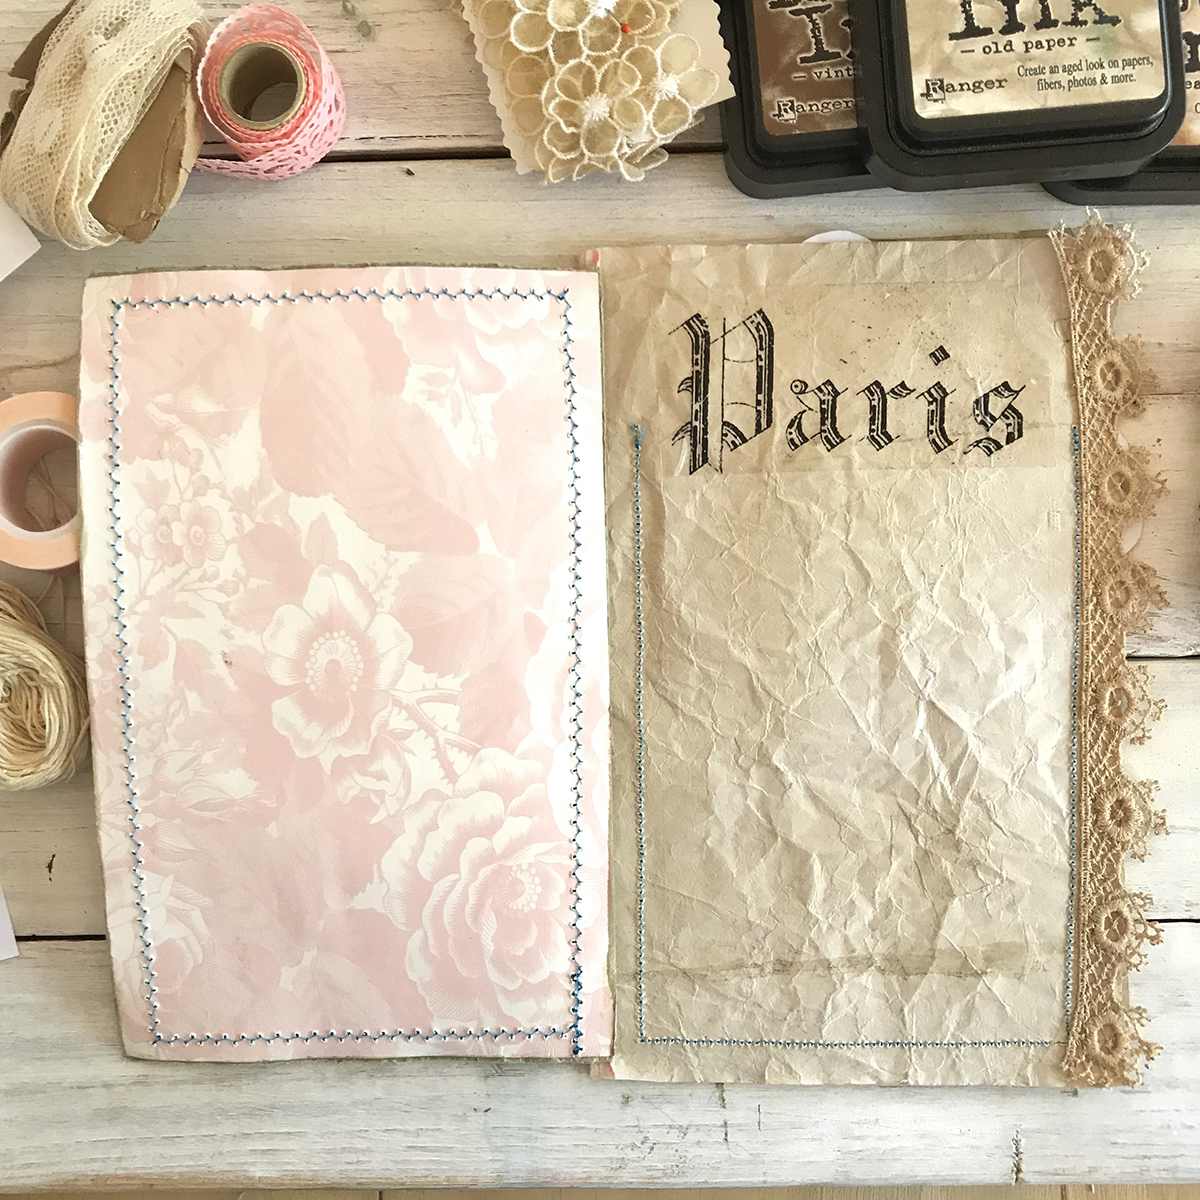 Junk Journal page with flowers and paris